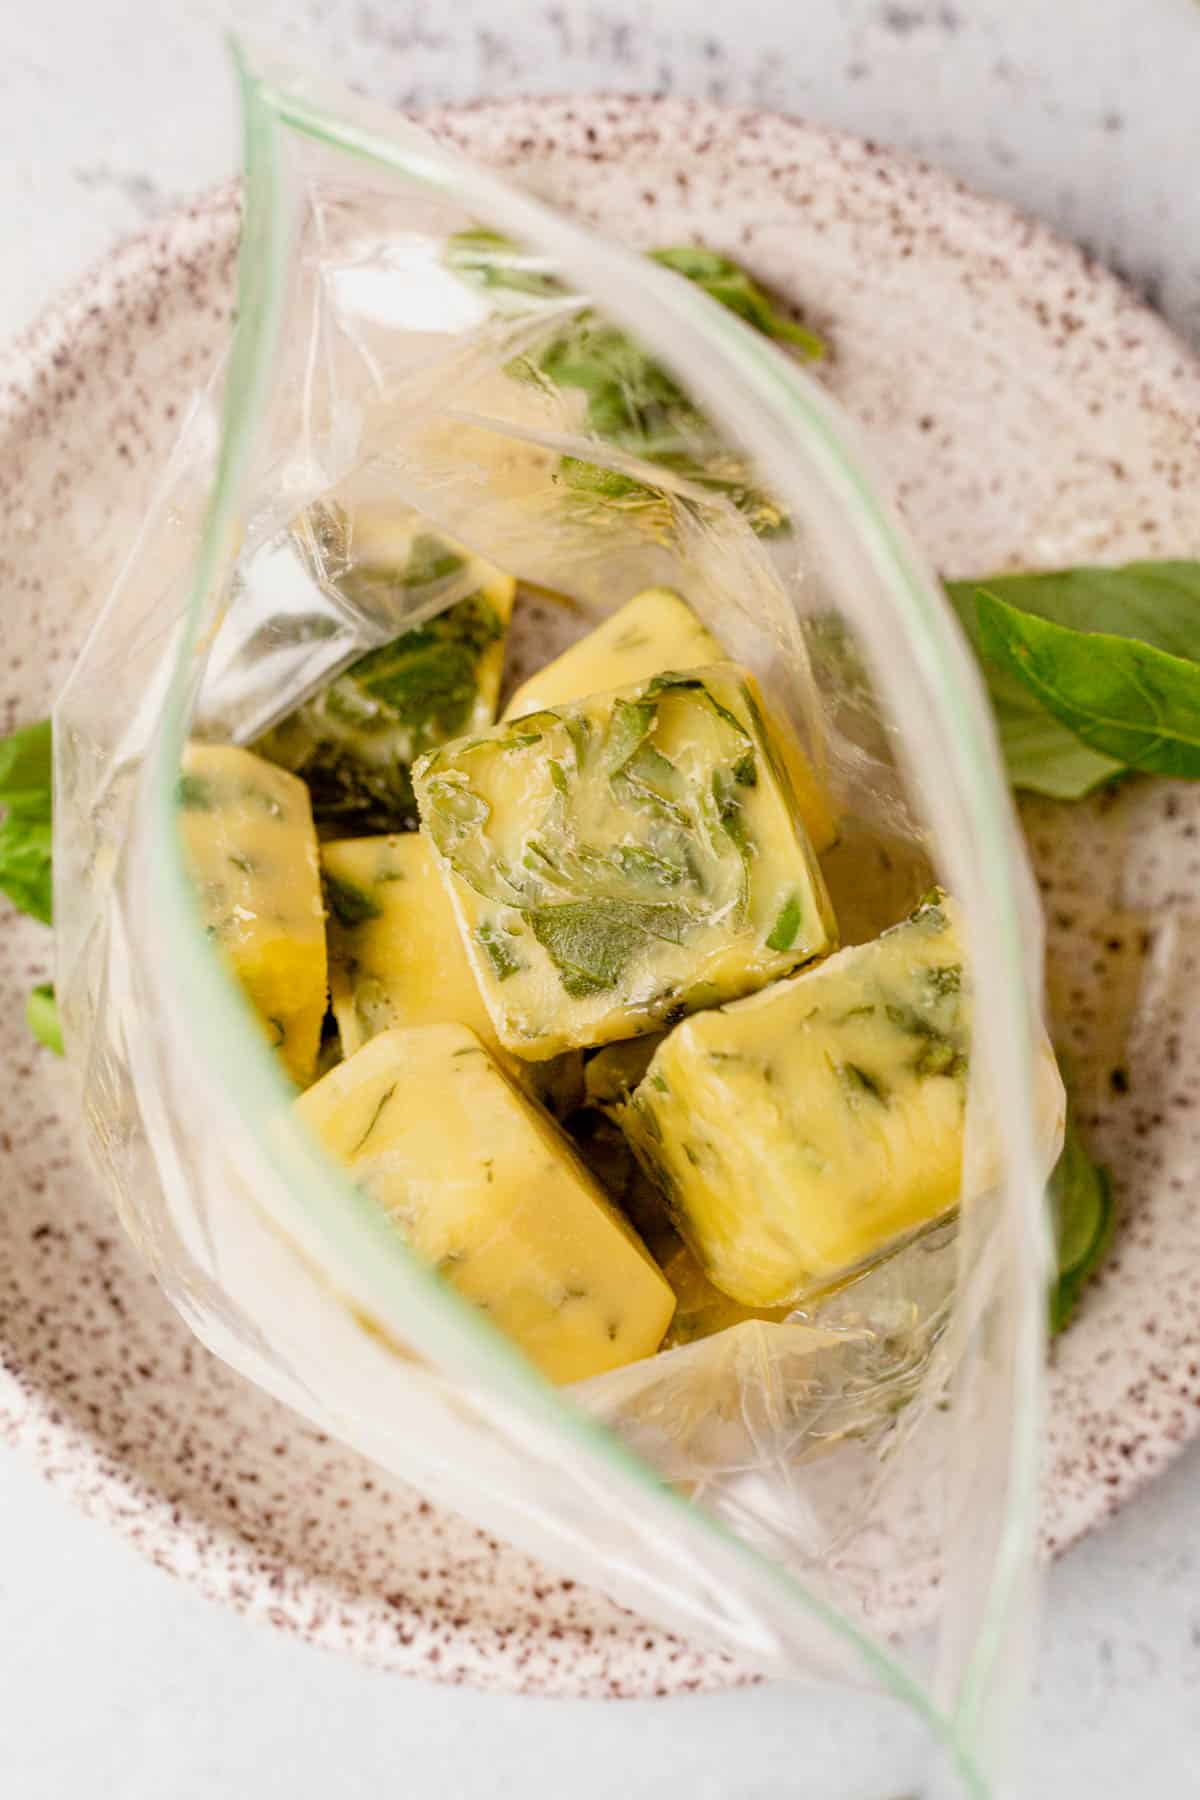 frozen basil and oil ice cubes in plastic bag